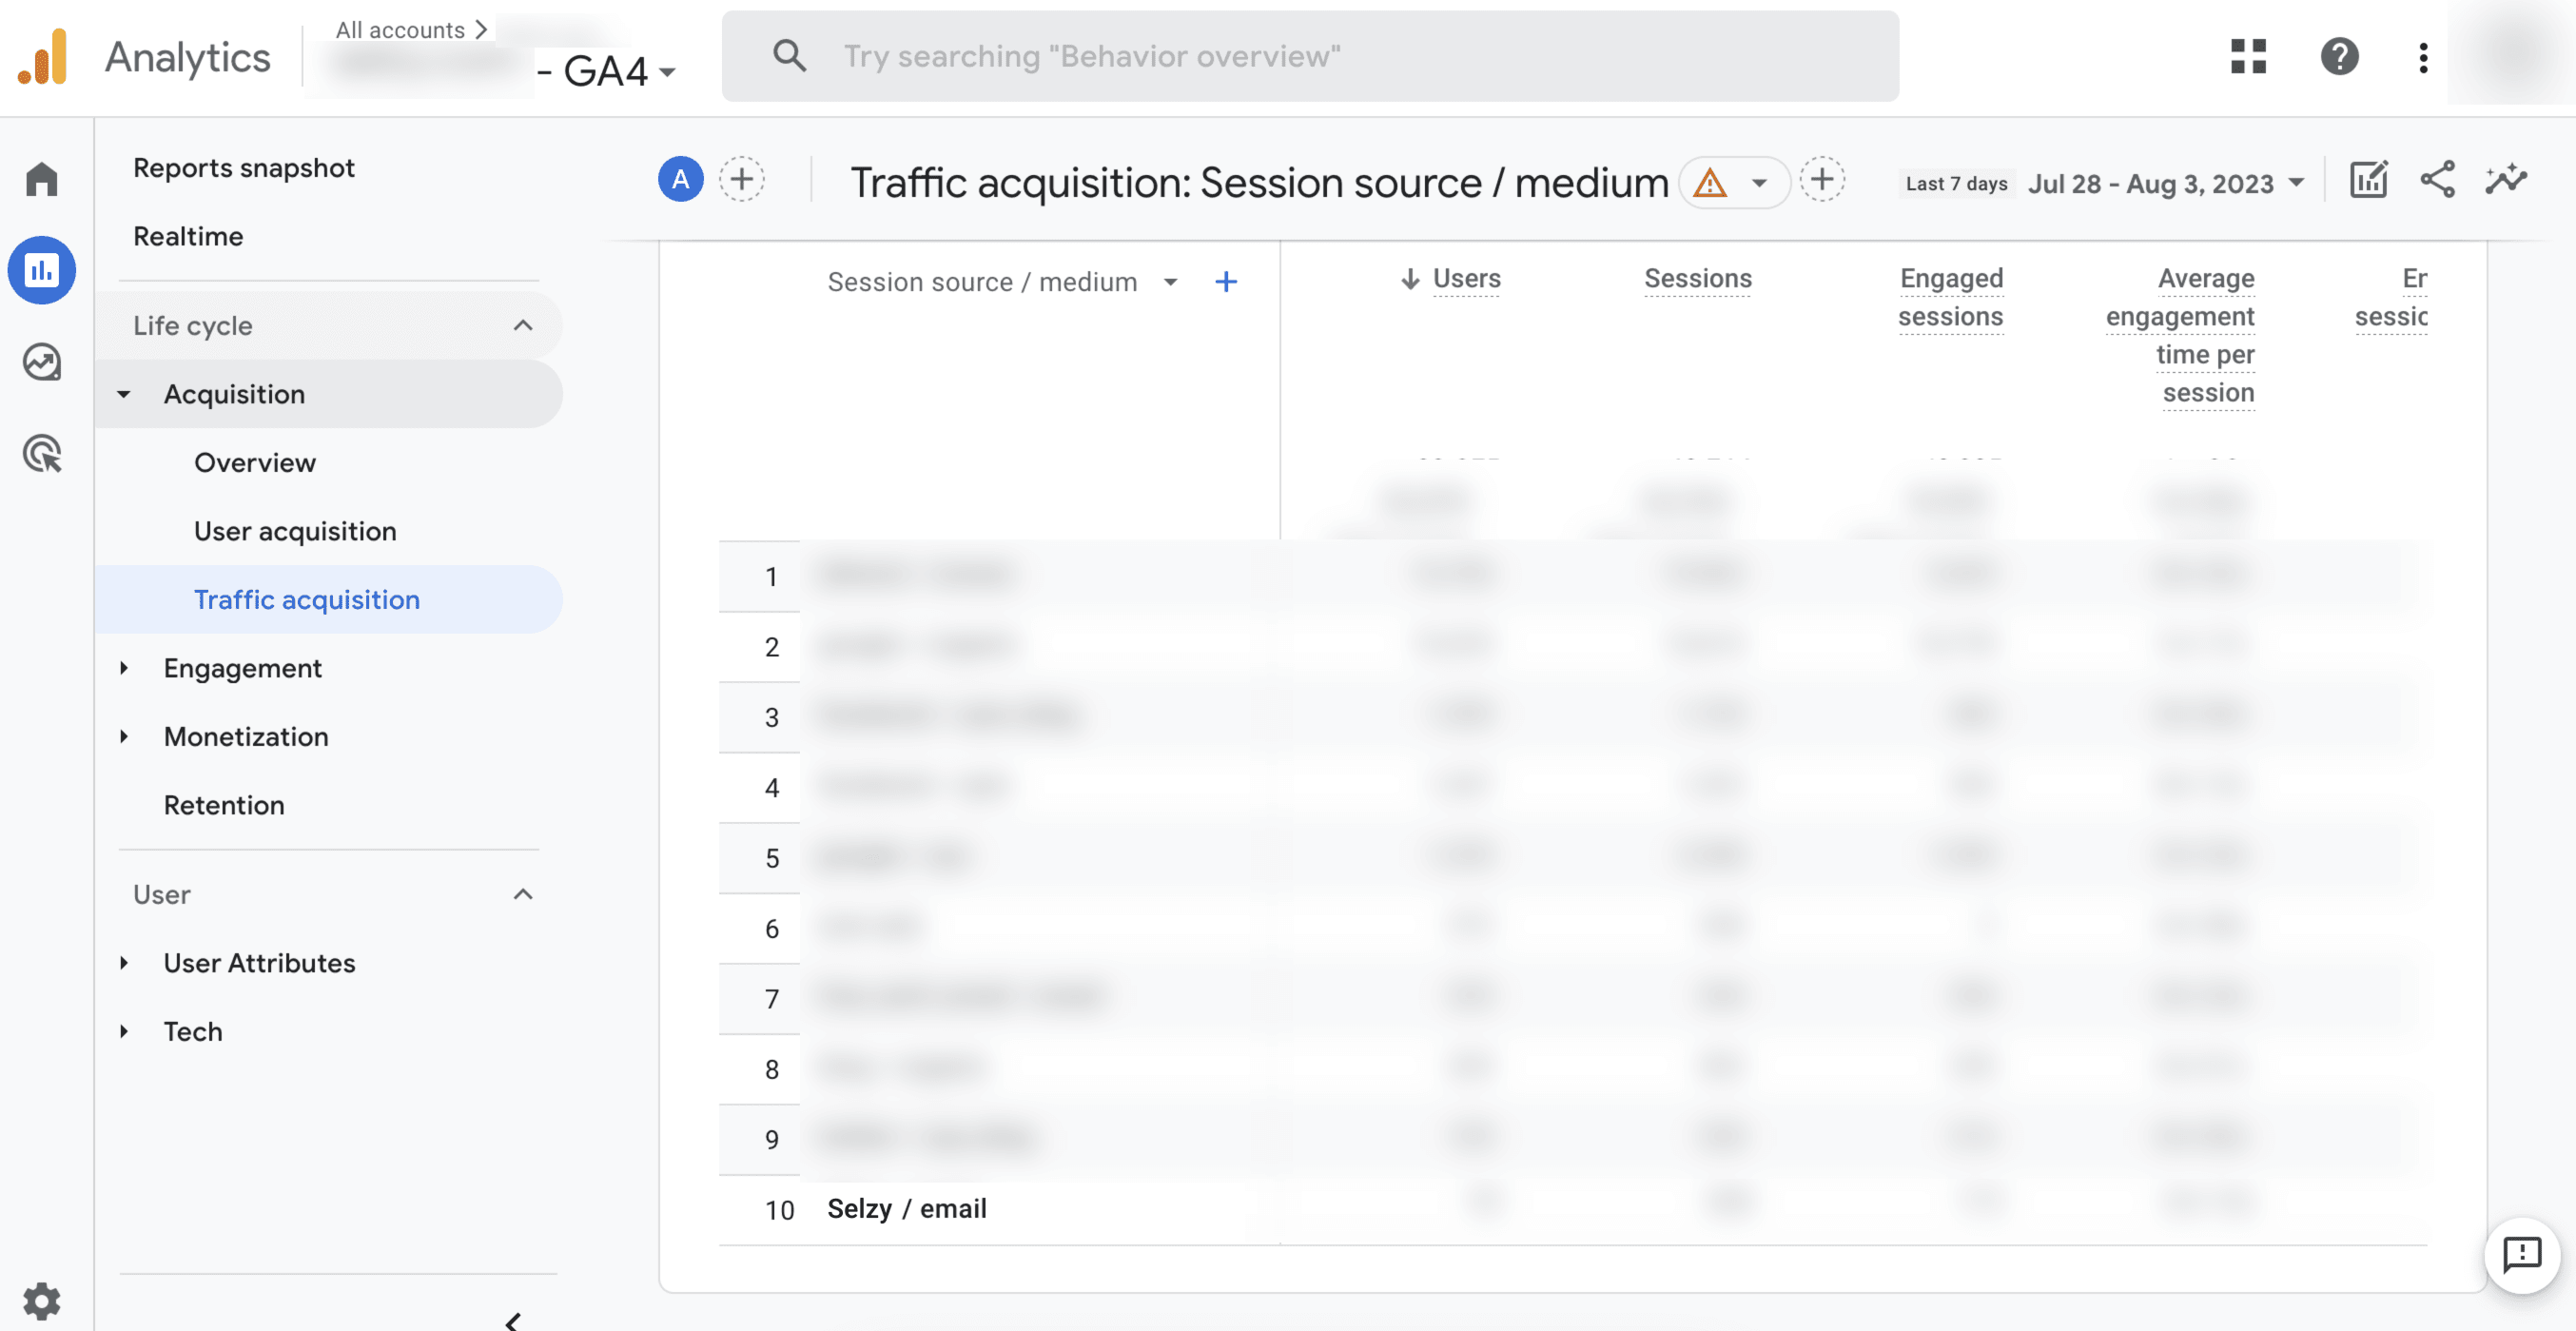 Campaign statistics in Google Analytics displaying Selzy / email traffic